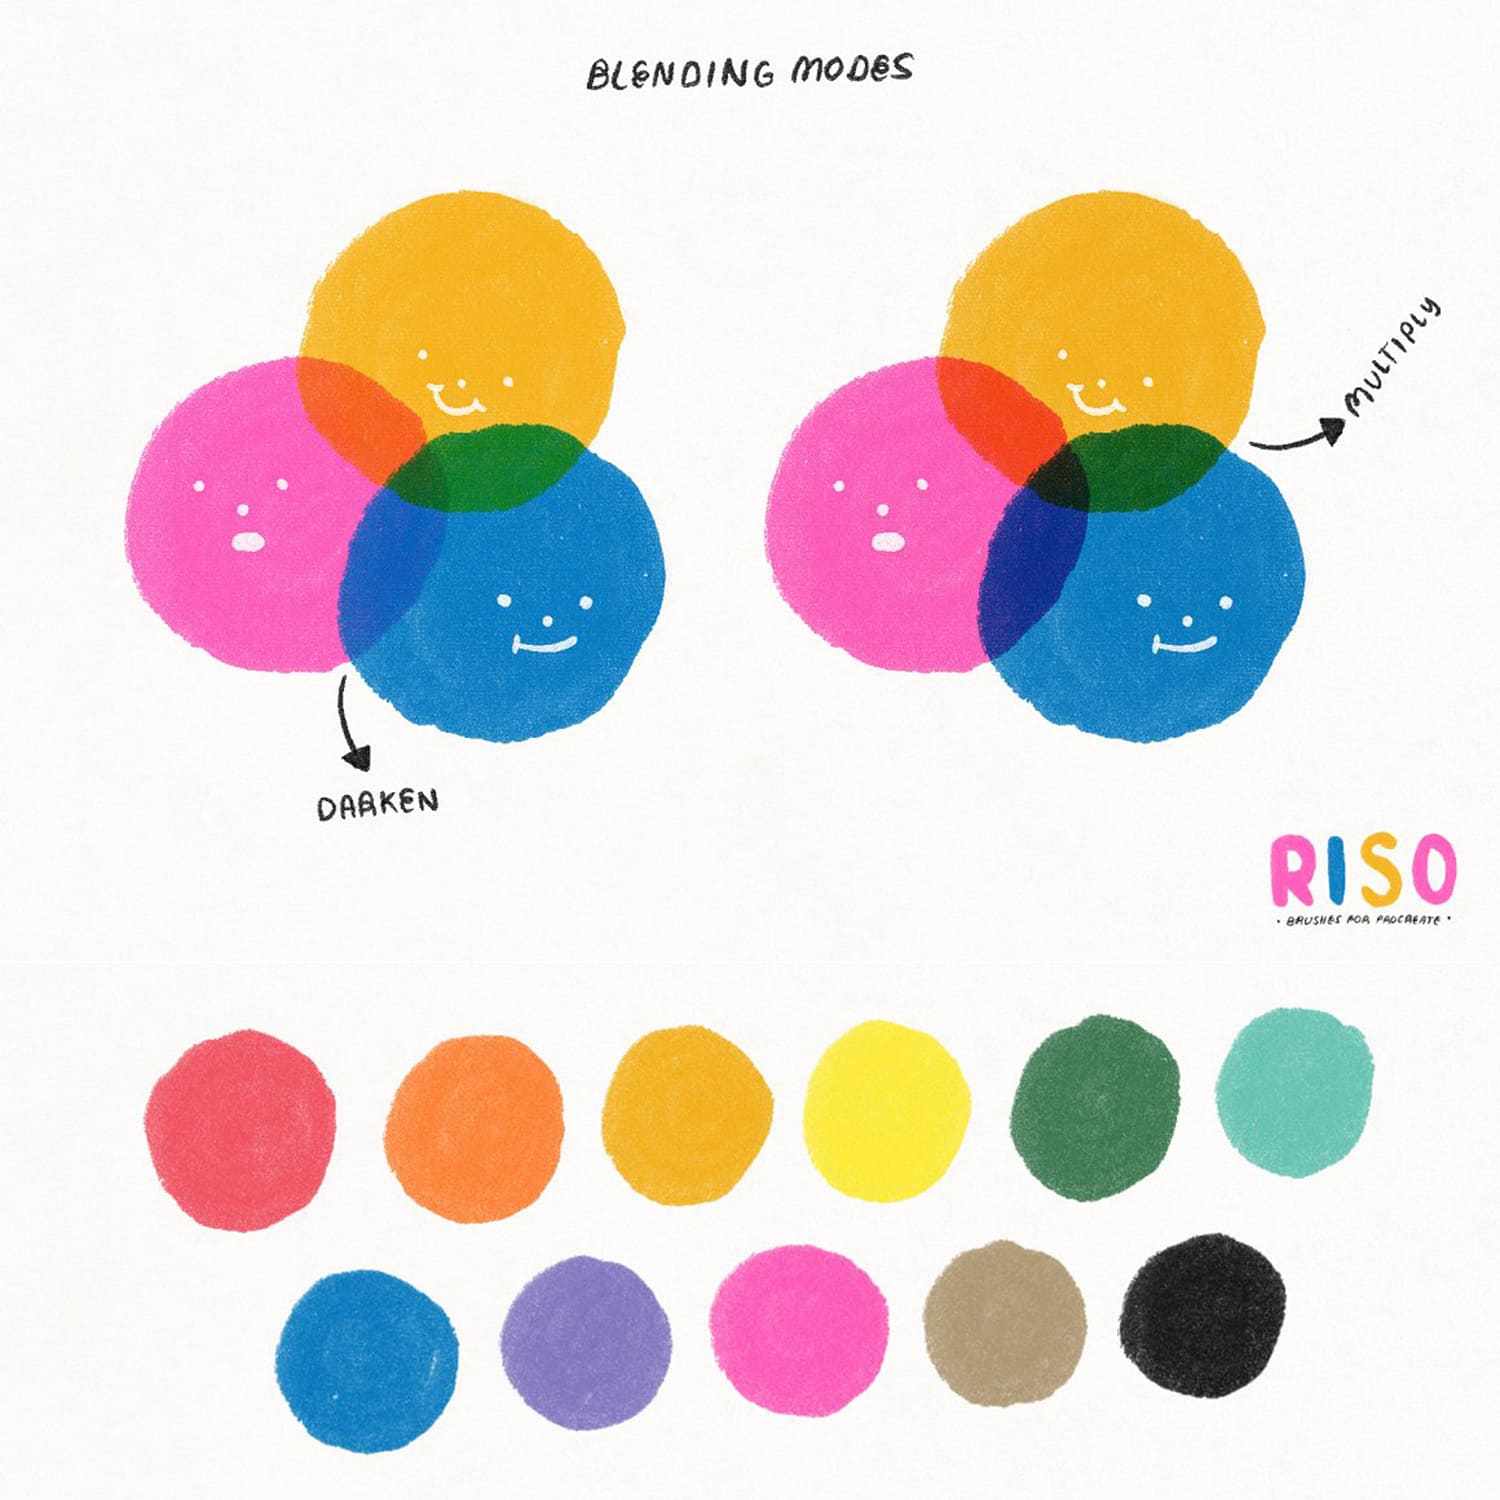 Riso Brushes For Procreate - Blending Modes Preview.